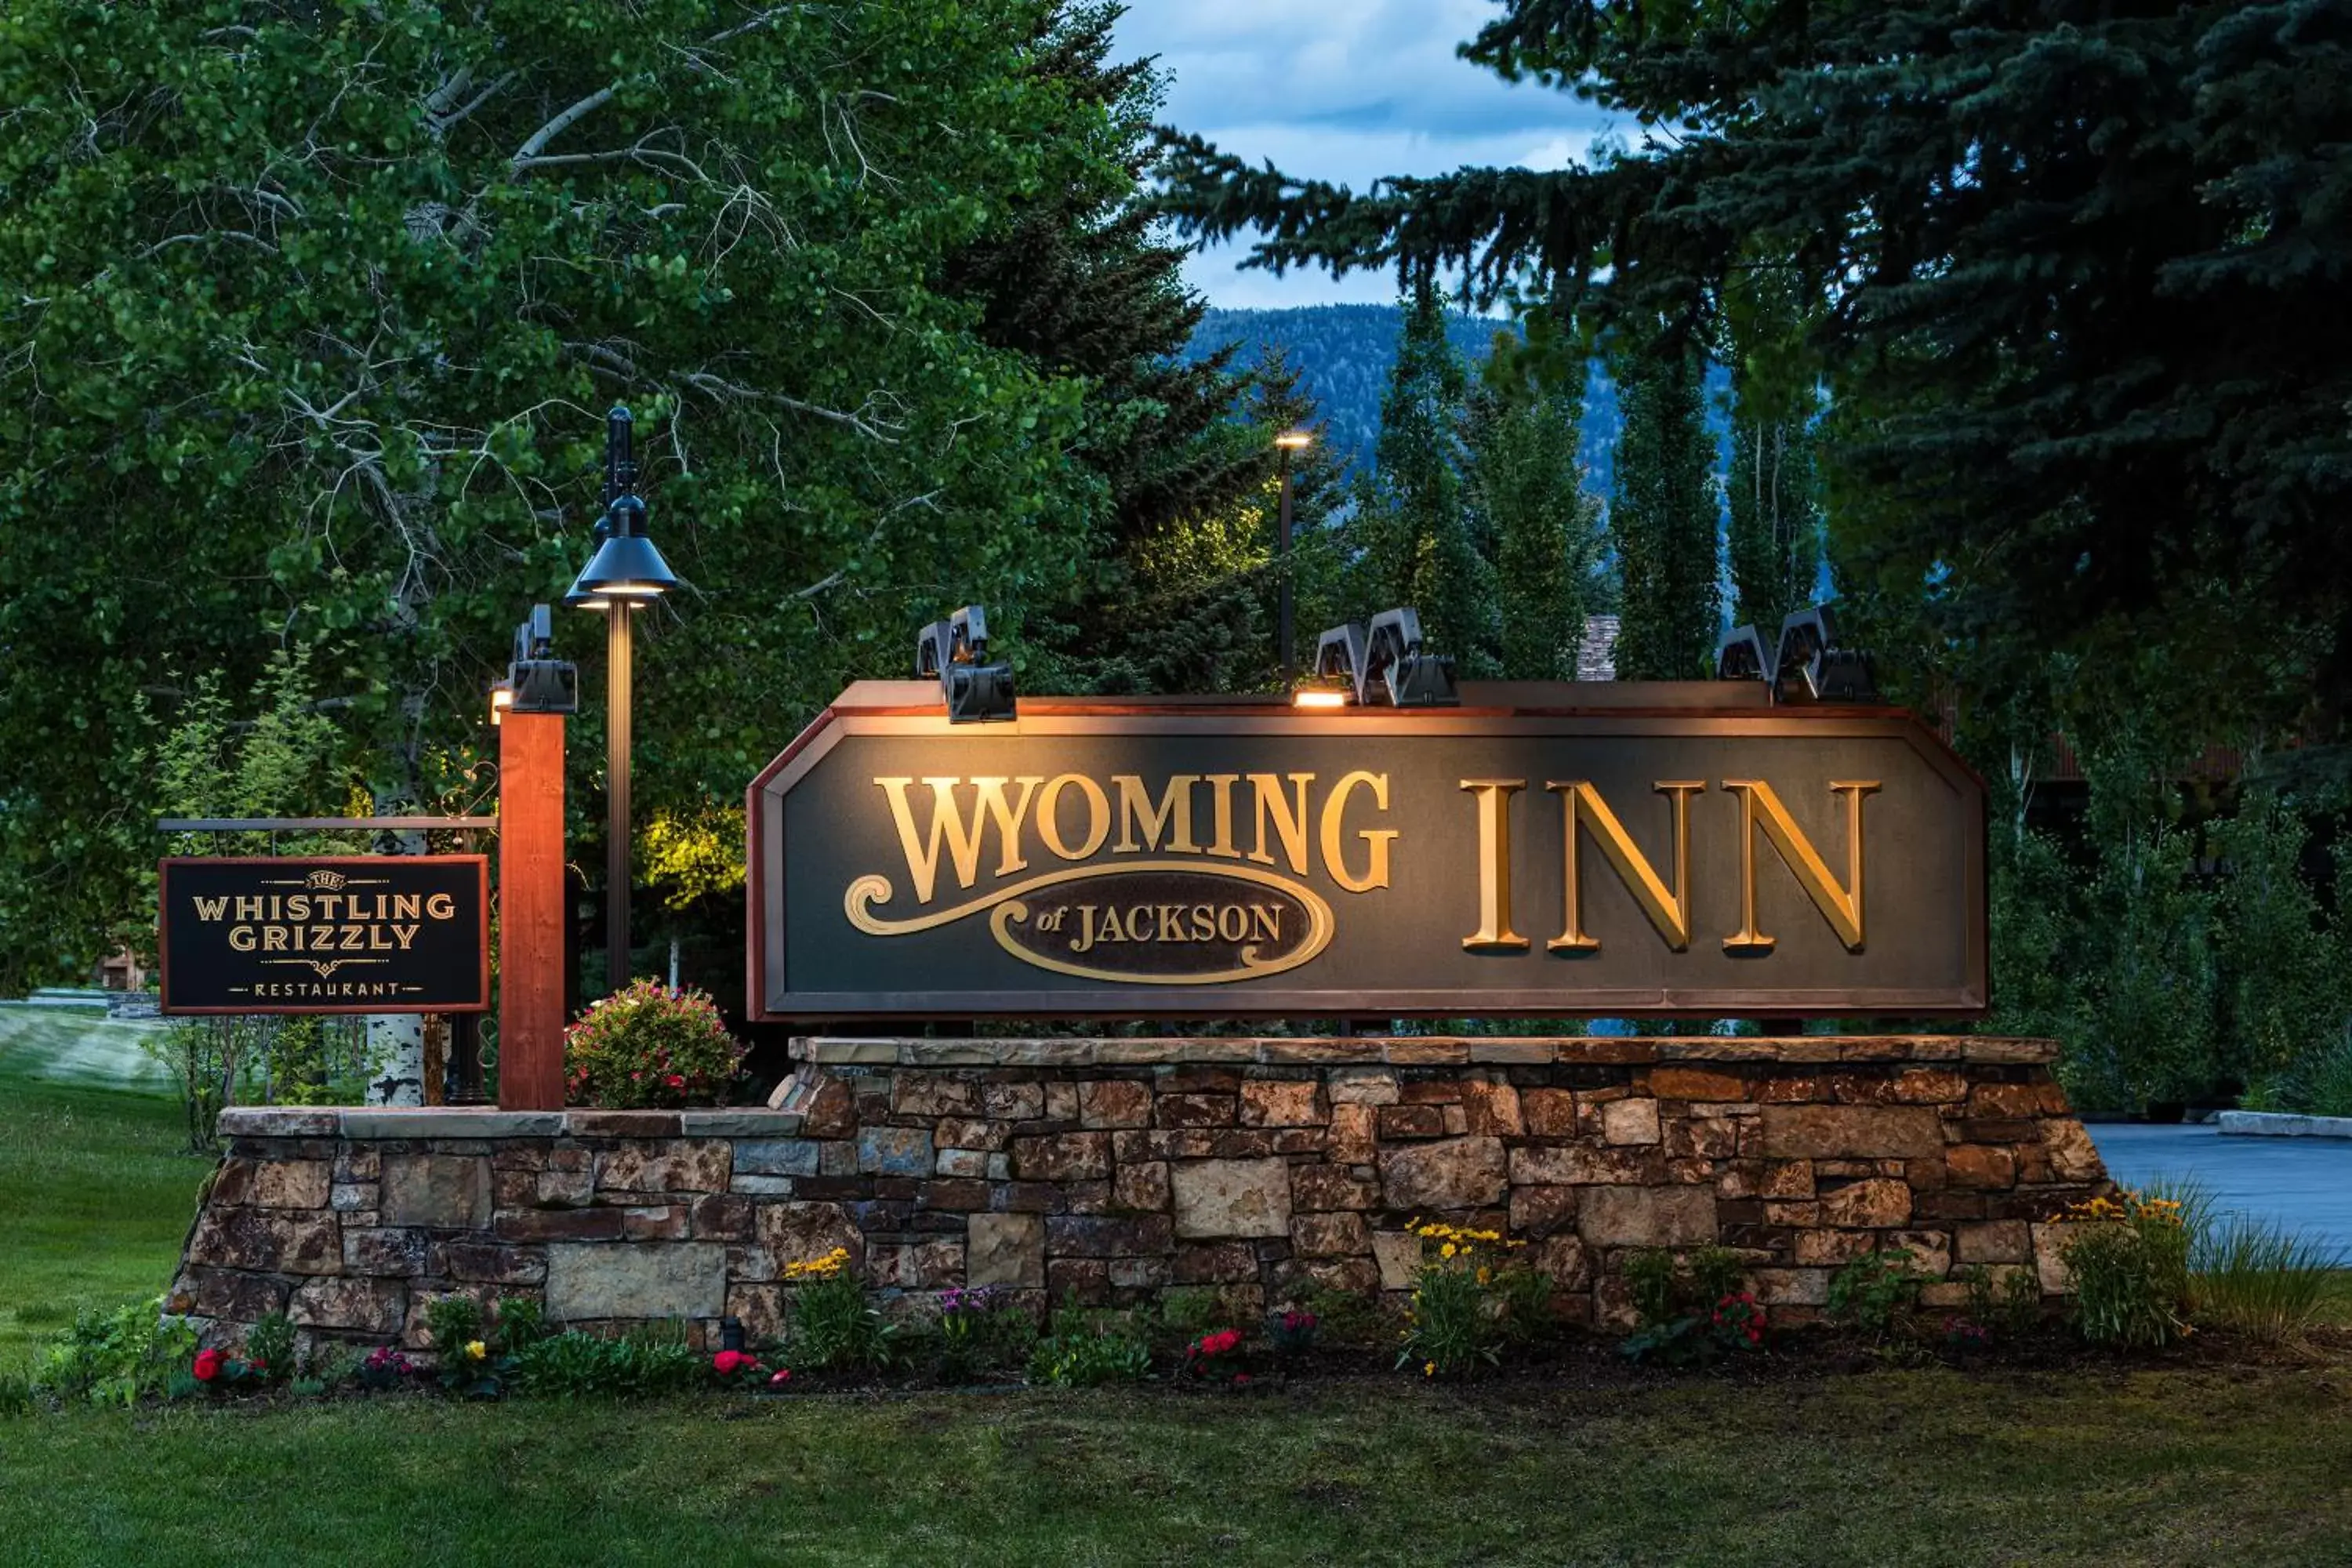 Property logo or sign in Wyoming Inn of Jackson Hole